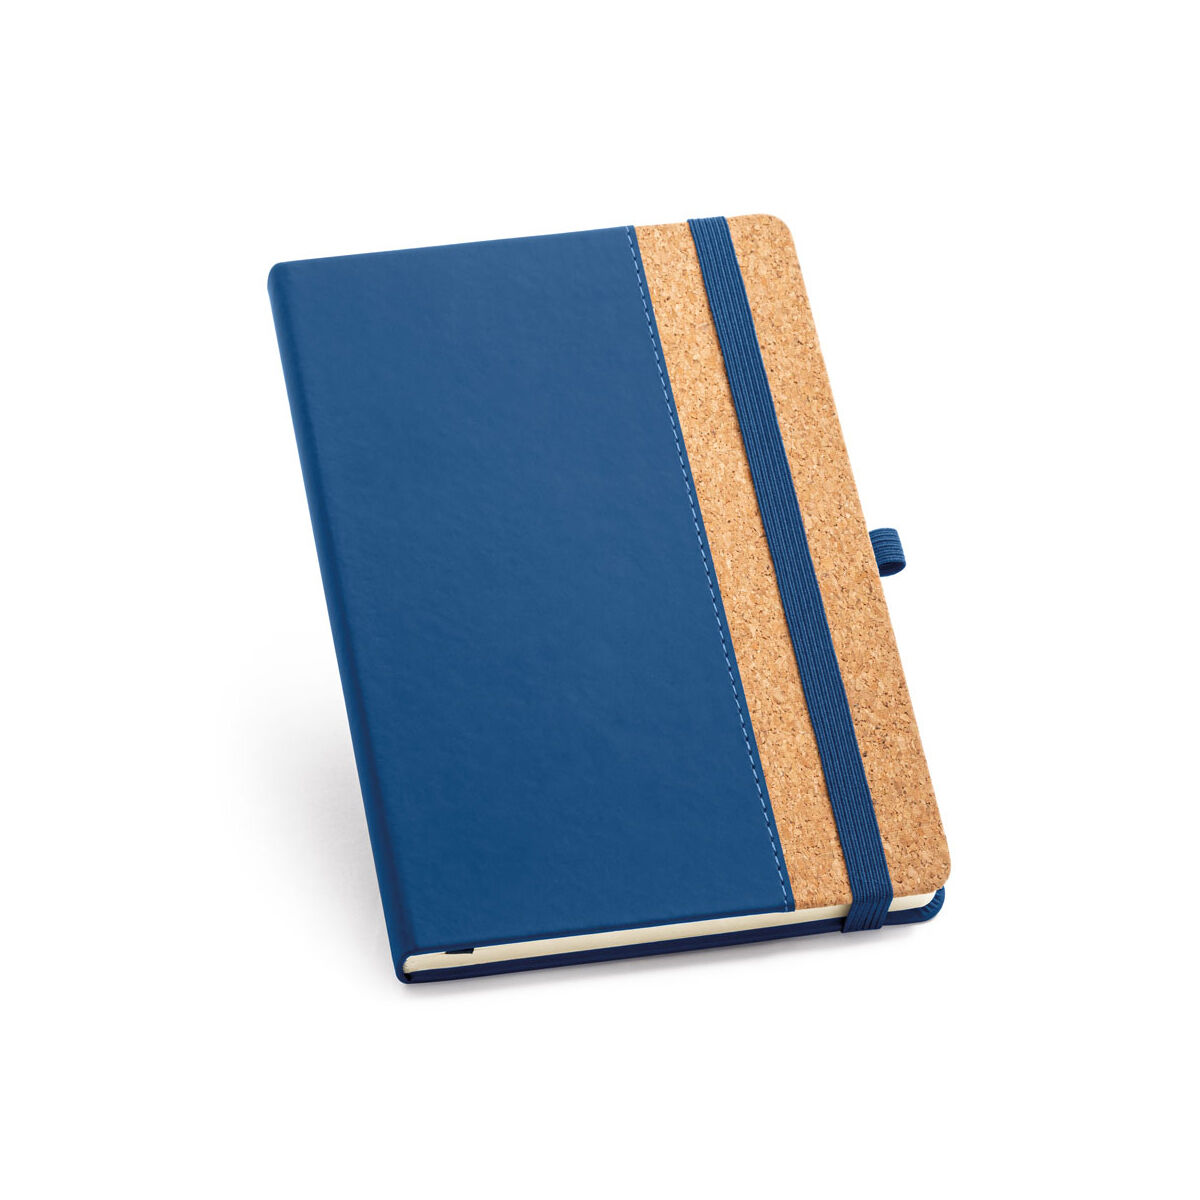 A5 Notebook with PU and Cork Cover in Blue Colour